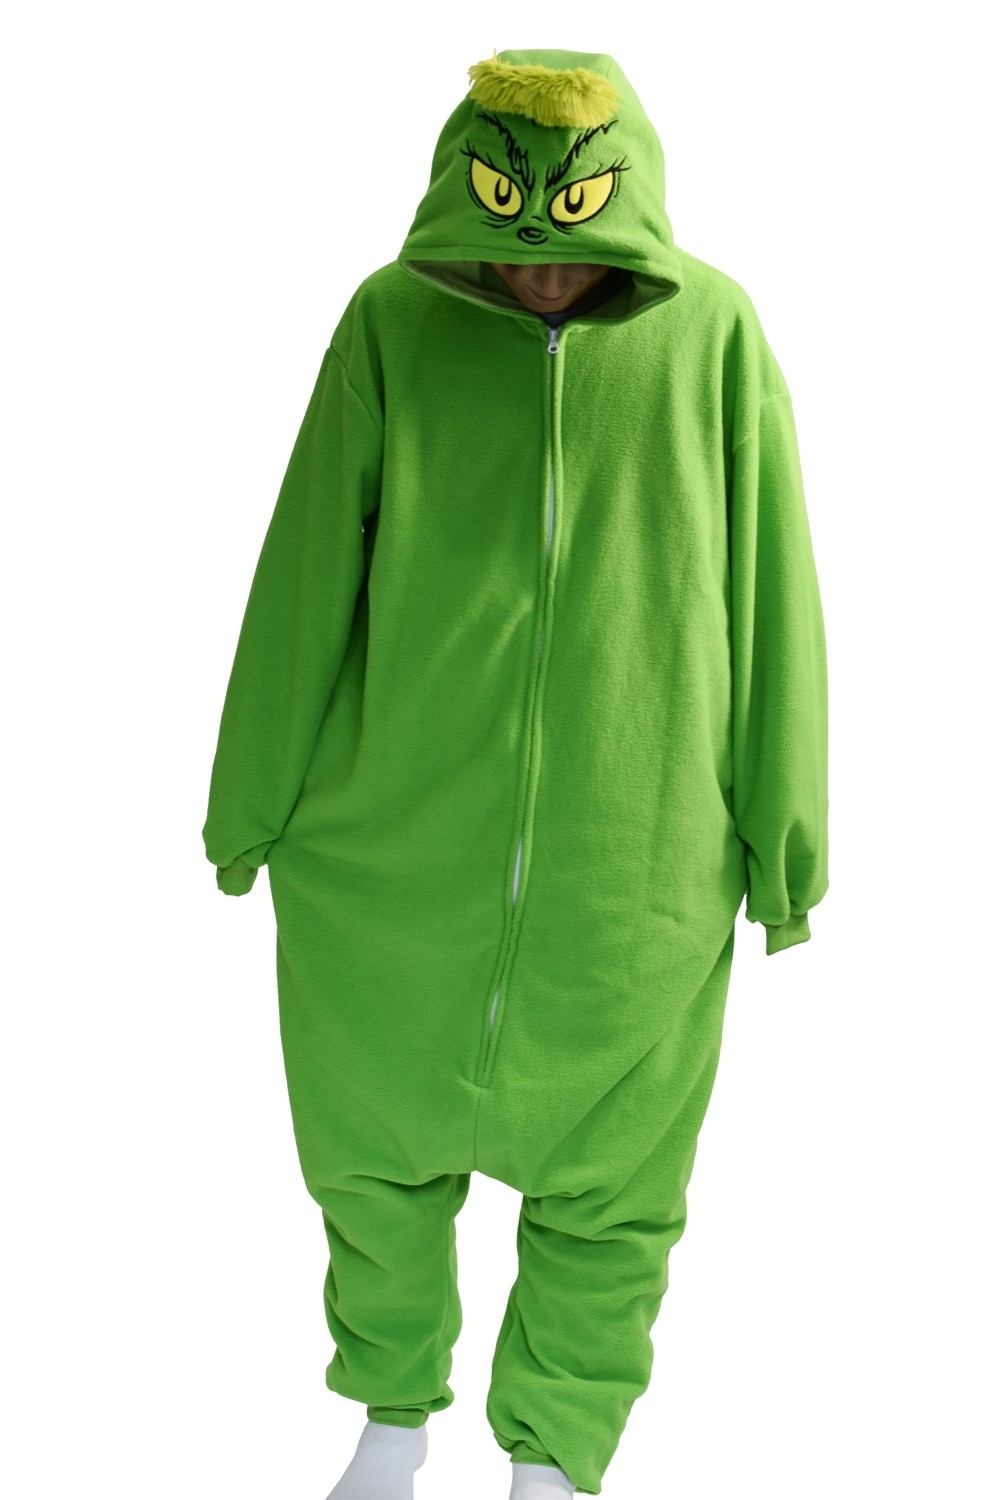 Grinch Onesie Christmas Costume For Adults